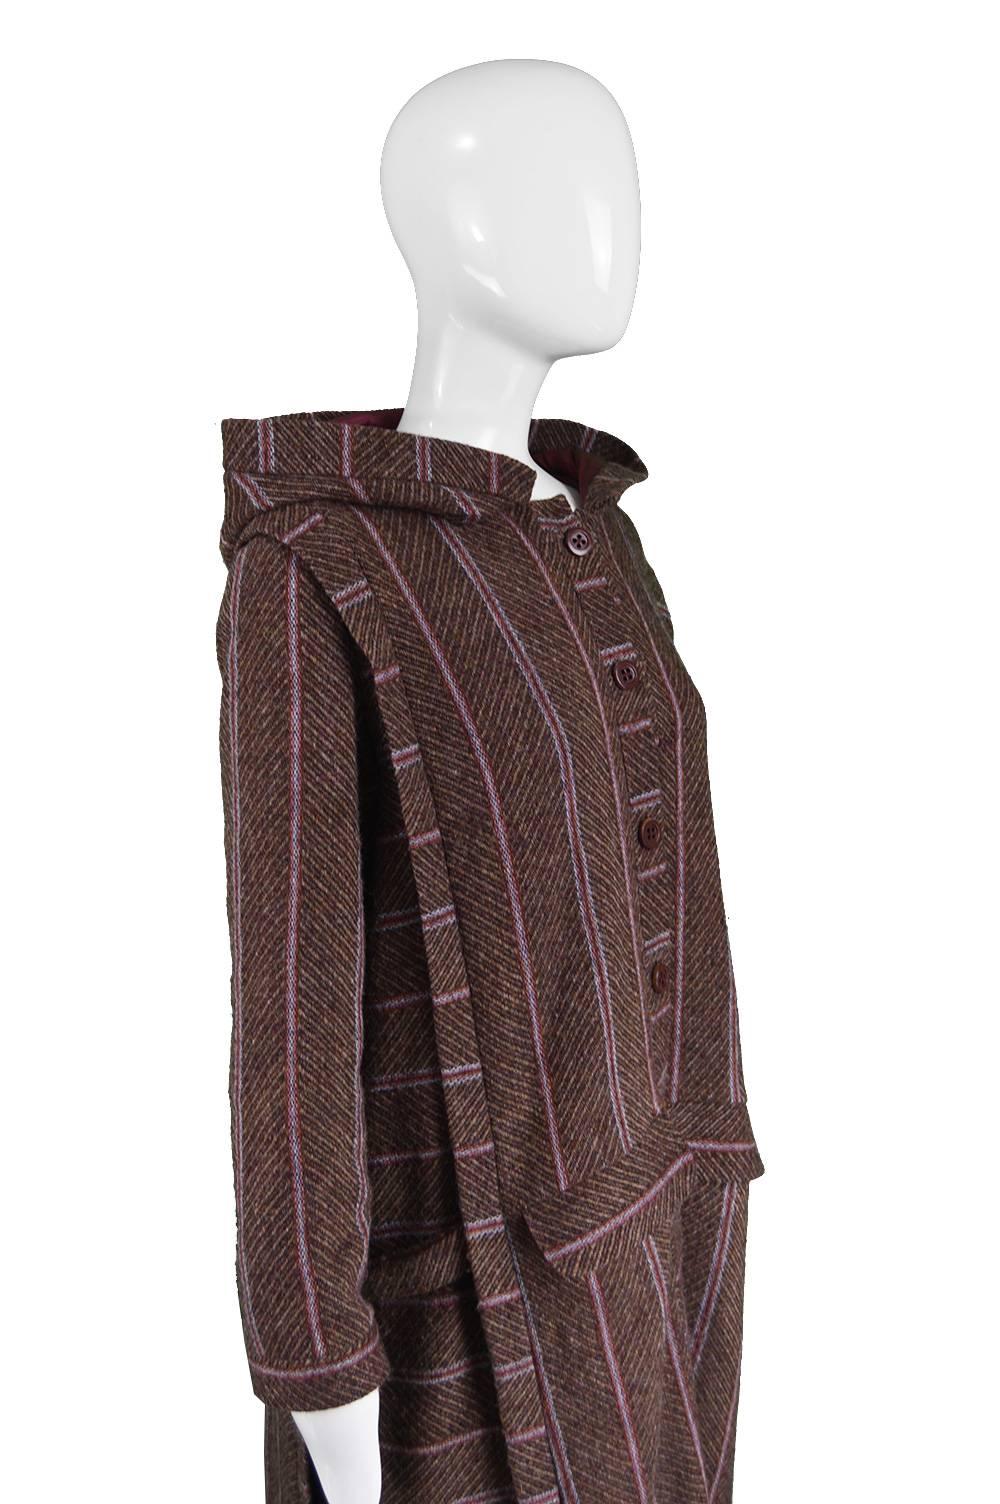 Bill Gibb Dramatic Brown Wool Striped Vintage Coat with Oversized Hood, 1970s 1